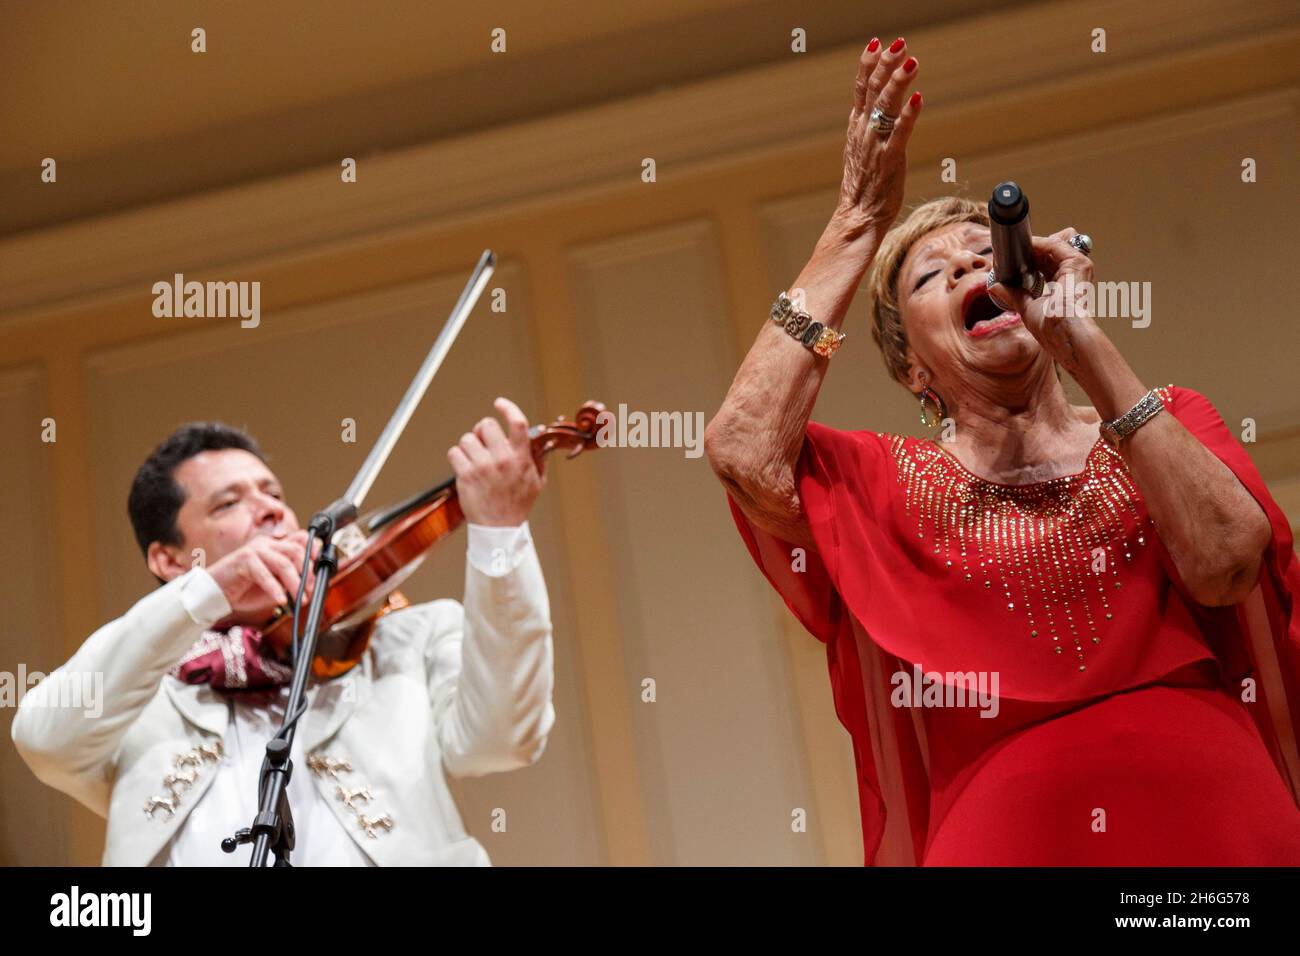 Washington, United States of America. 18 September, 2019. Beatriz 'La Paloma del Norte' Llamas performs with Mariachi Esperanza at the Homegrown Concert Series showcase of the 2019 NEA National Heritage Fellows in the Coolidge Auditorium, September 18, 2019 in Washington, D.C.  Credit: Shawn Miller/Library of Congress/Alamy Live News Stock Photo